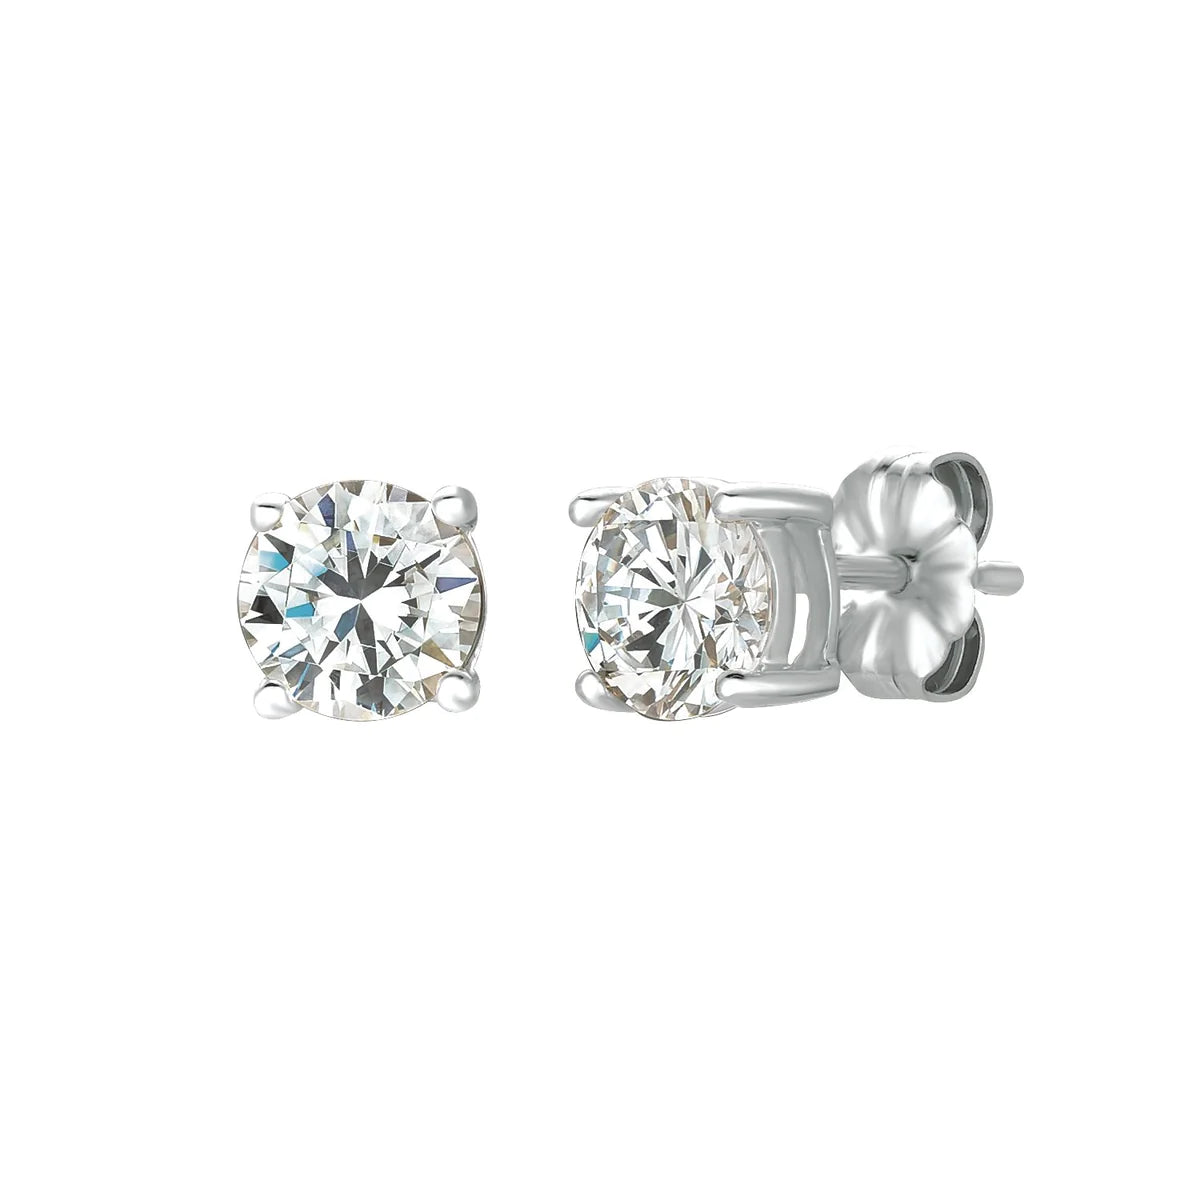 Solitaire Brilliant Stud Earrings Finished in Pure Platinum - 1.5 cttw